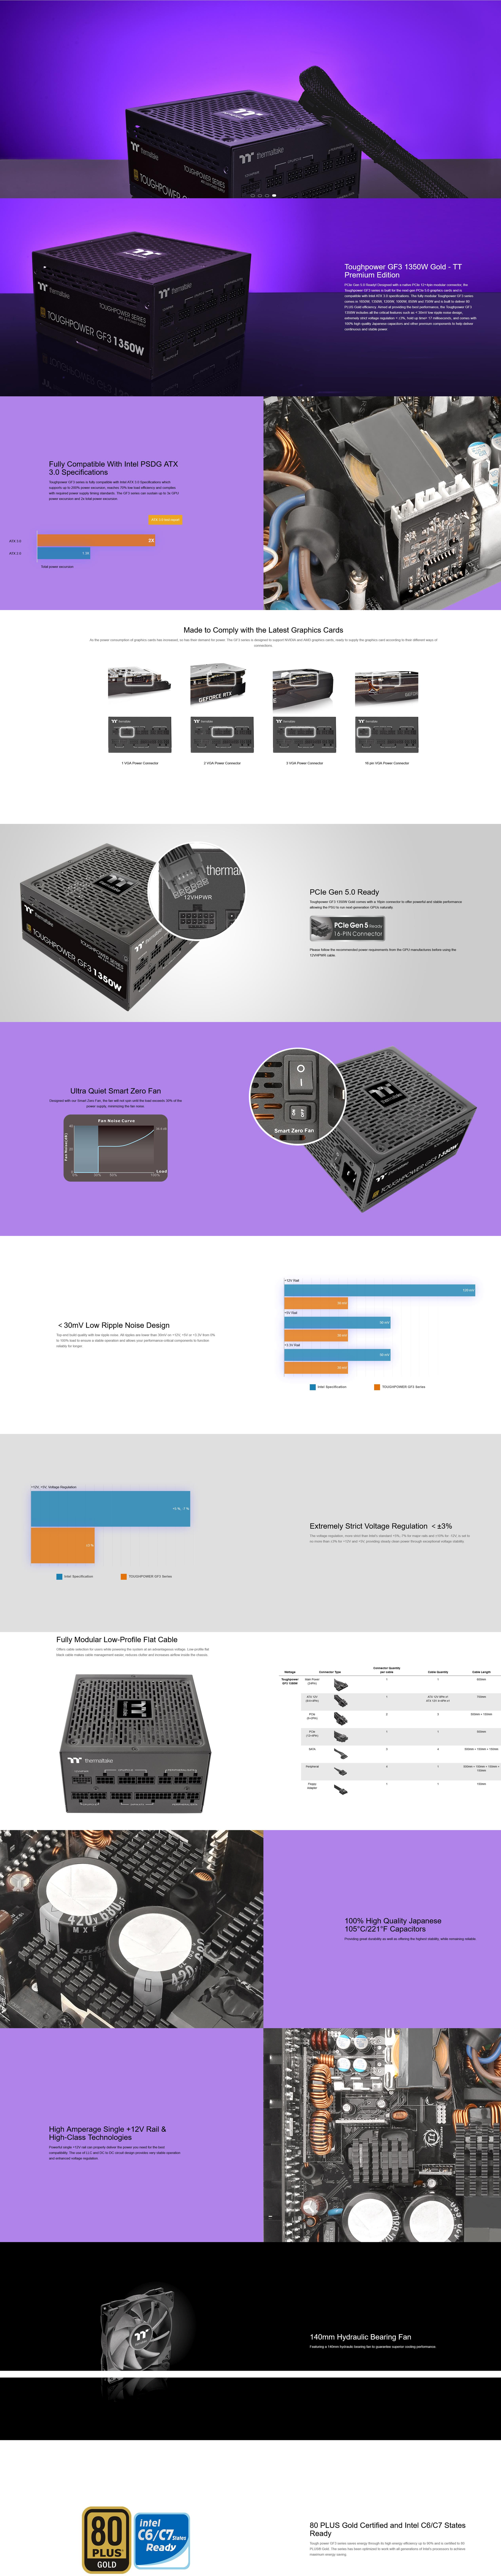 A large marketing image providing additional information about the product Thermaltake Toughpower GF3 - 1350W 80PLUS Gold PCIe 5.0 ATX Modular PSU - Additional alt info not provided